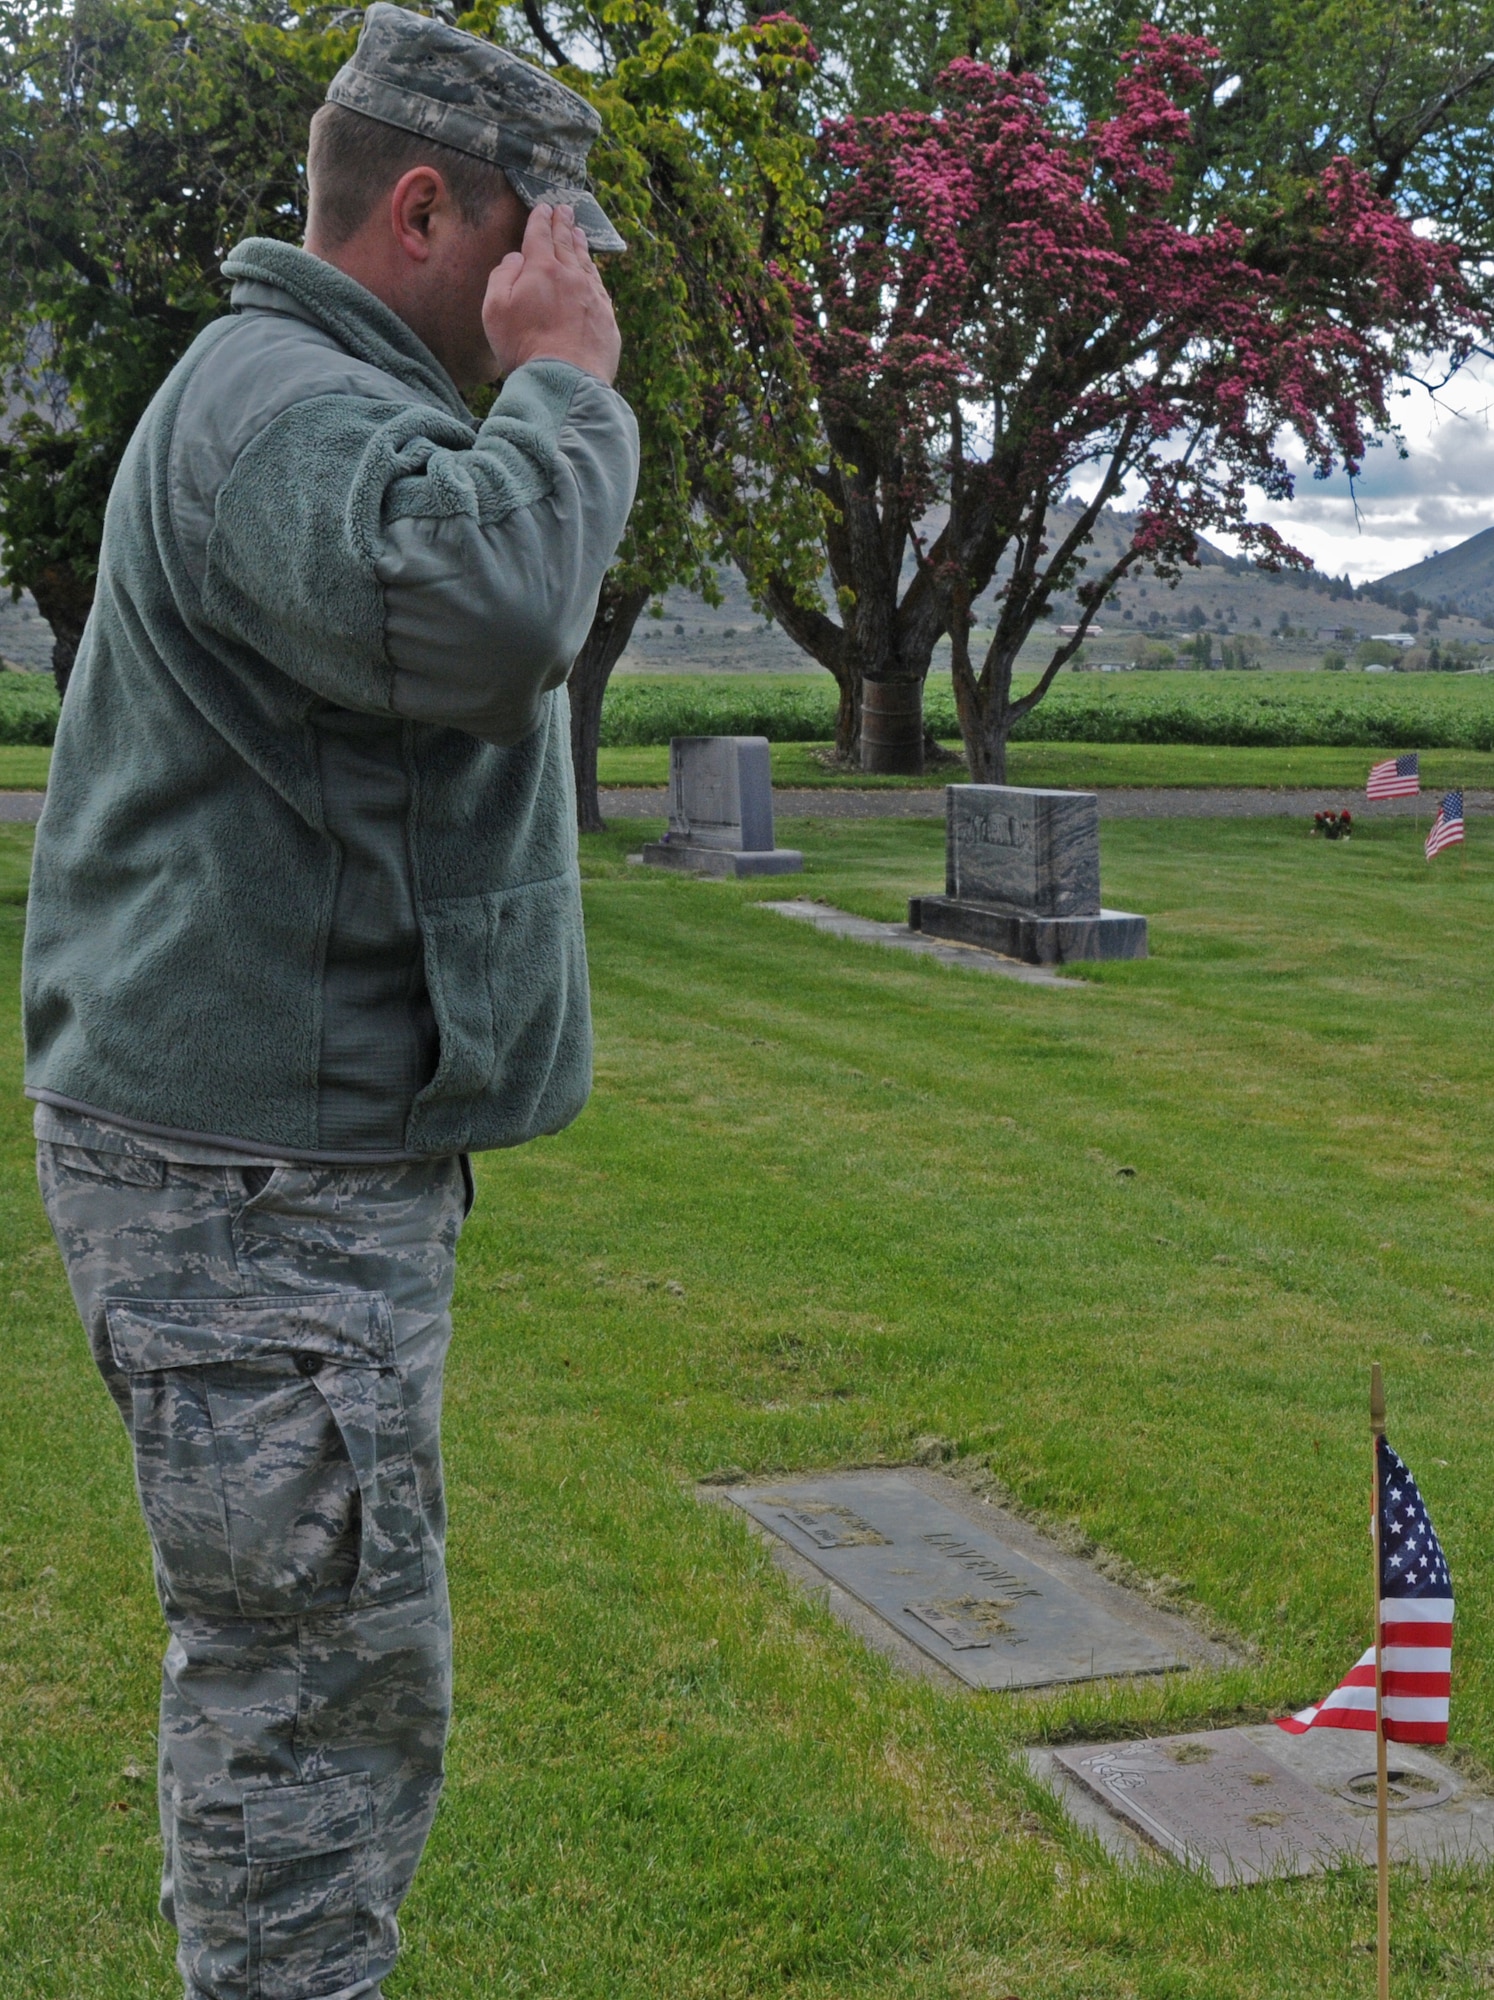 U.S. Air National Guard Master Sgt. Michael Shirar, 173rd Fighter Wing, salutes after placing a flag on the graves of local veterans at Mount Calvary Cemetery in Klamath Falls, Ore. May 23, 2013.  Members of the 173rd Fighter Wing spent their morning placing flags in honor of Memorial Day.  (U.S. Air National Guard photo by Master Sgt. Jennifer Shirar) RELEASED  